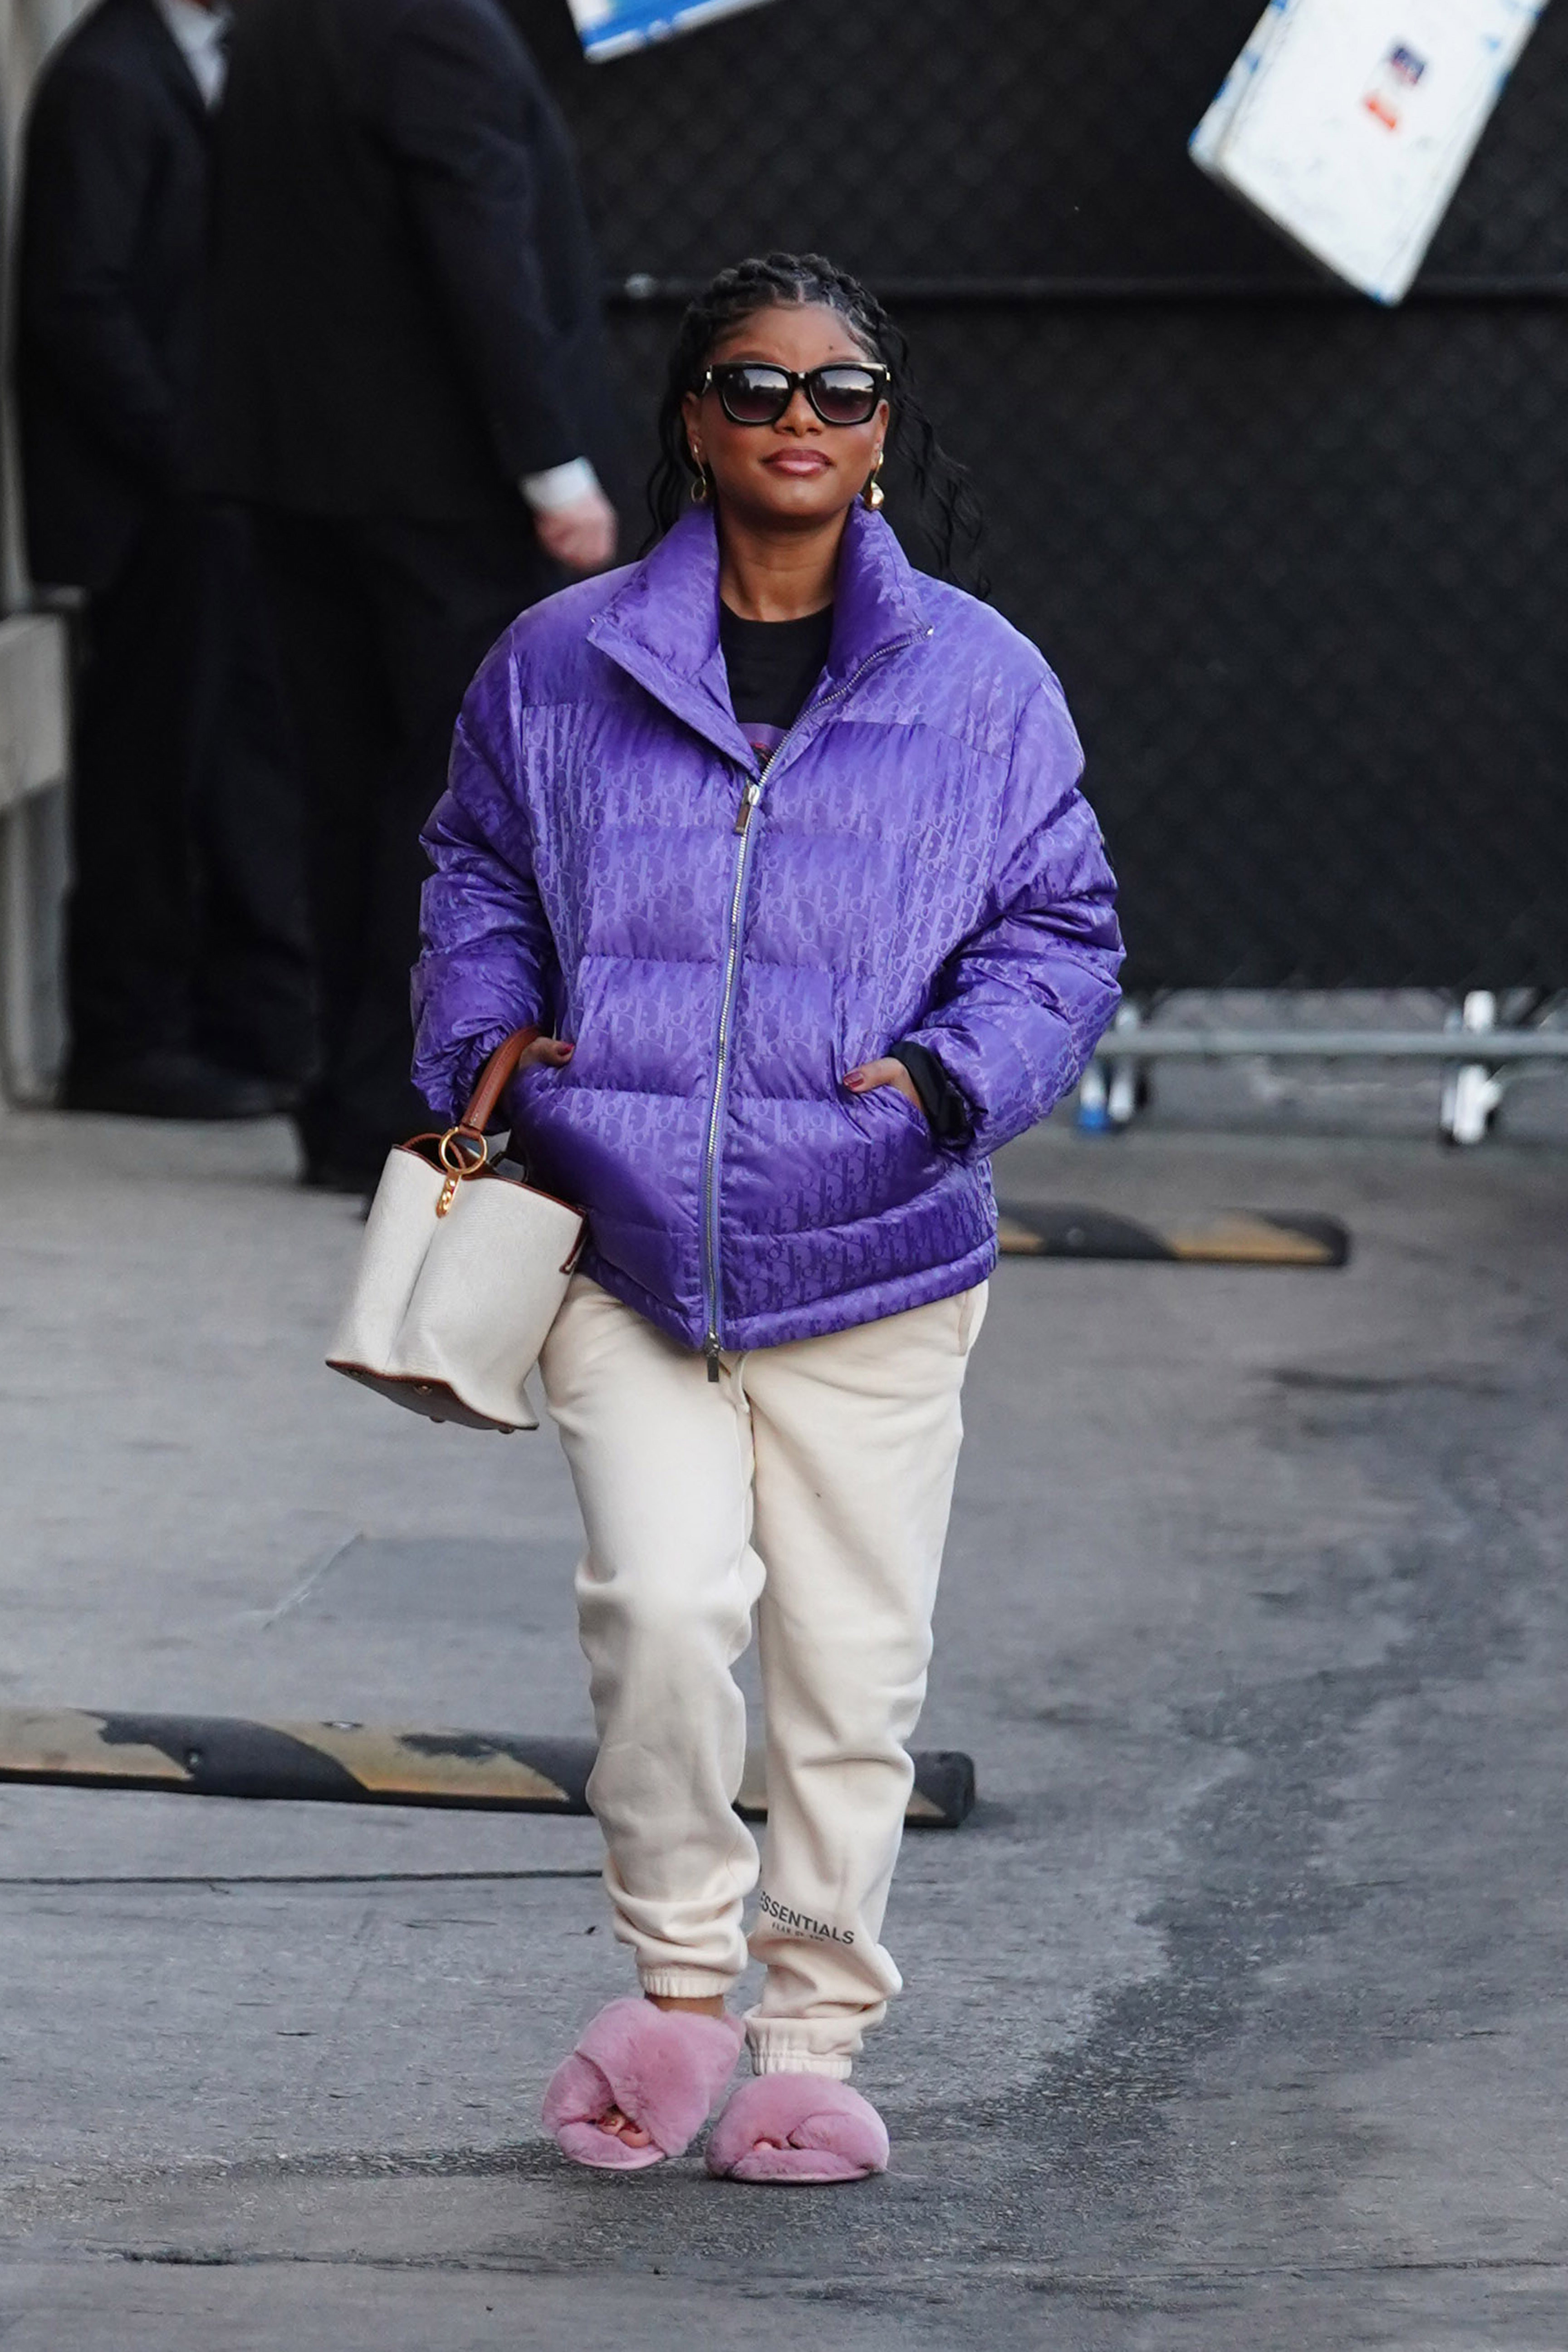 Halle hid her baby bump with baggy, oversized clothes in recent months as she dodged pregnancy speculation